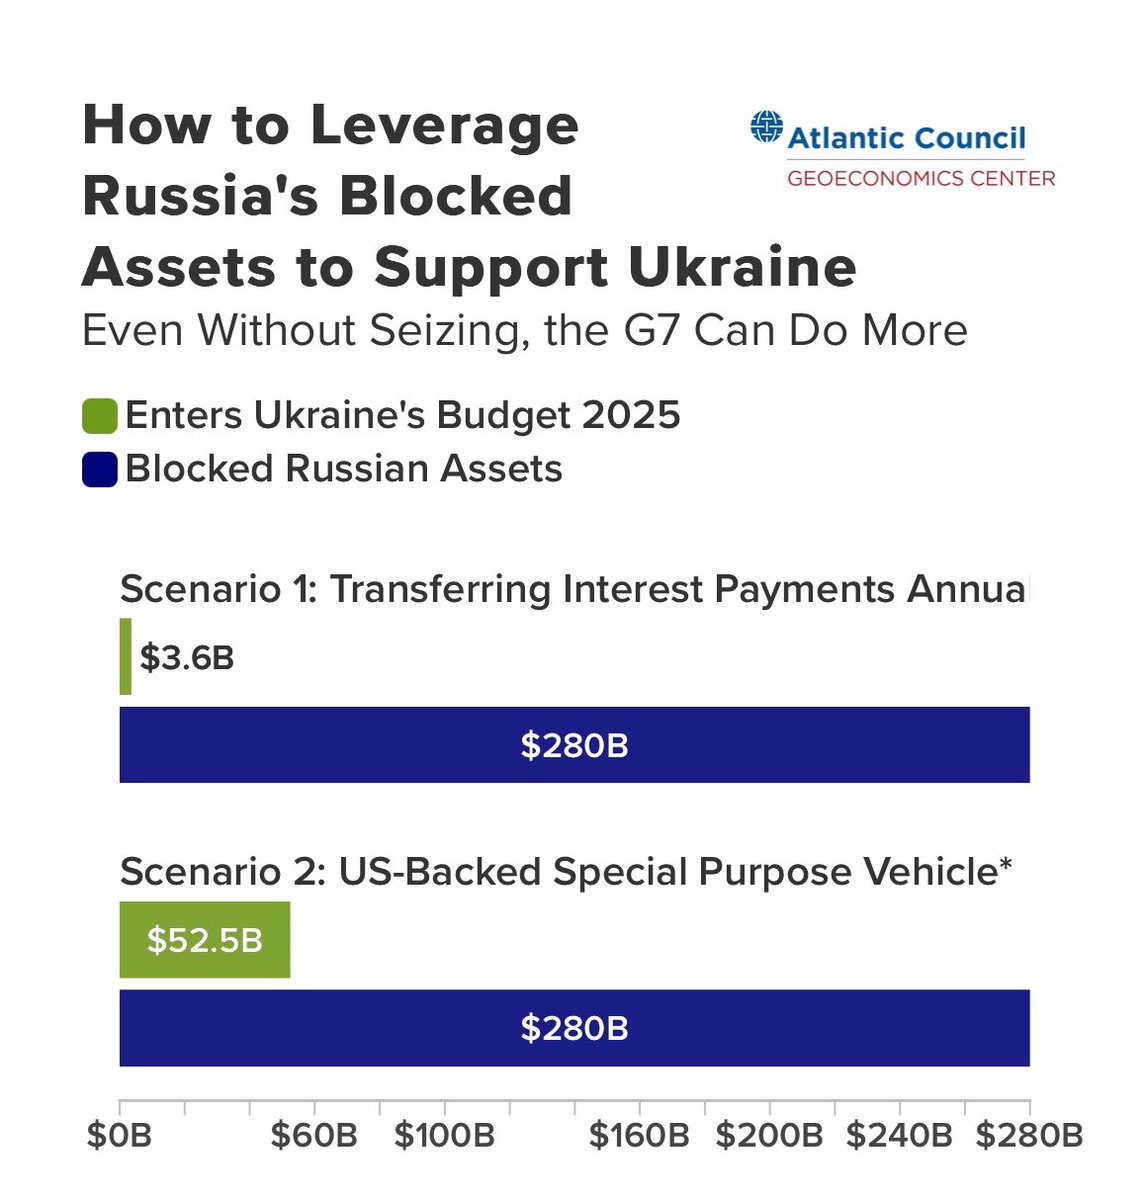 G7 may be moving forward on plan to unlock $50 billion for Ukraine from blocked Russian assets. Read the @ACGeoEcon team break down how it works: atlanticcouncil.org/blogs/econogra…